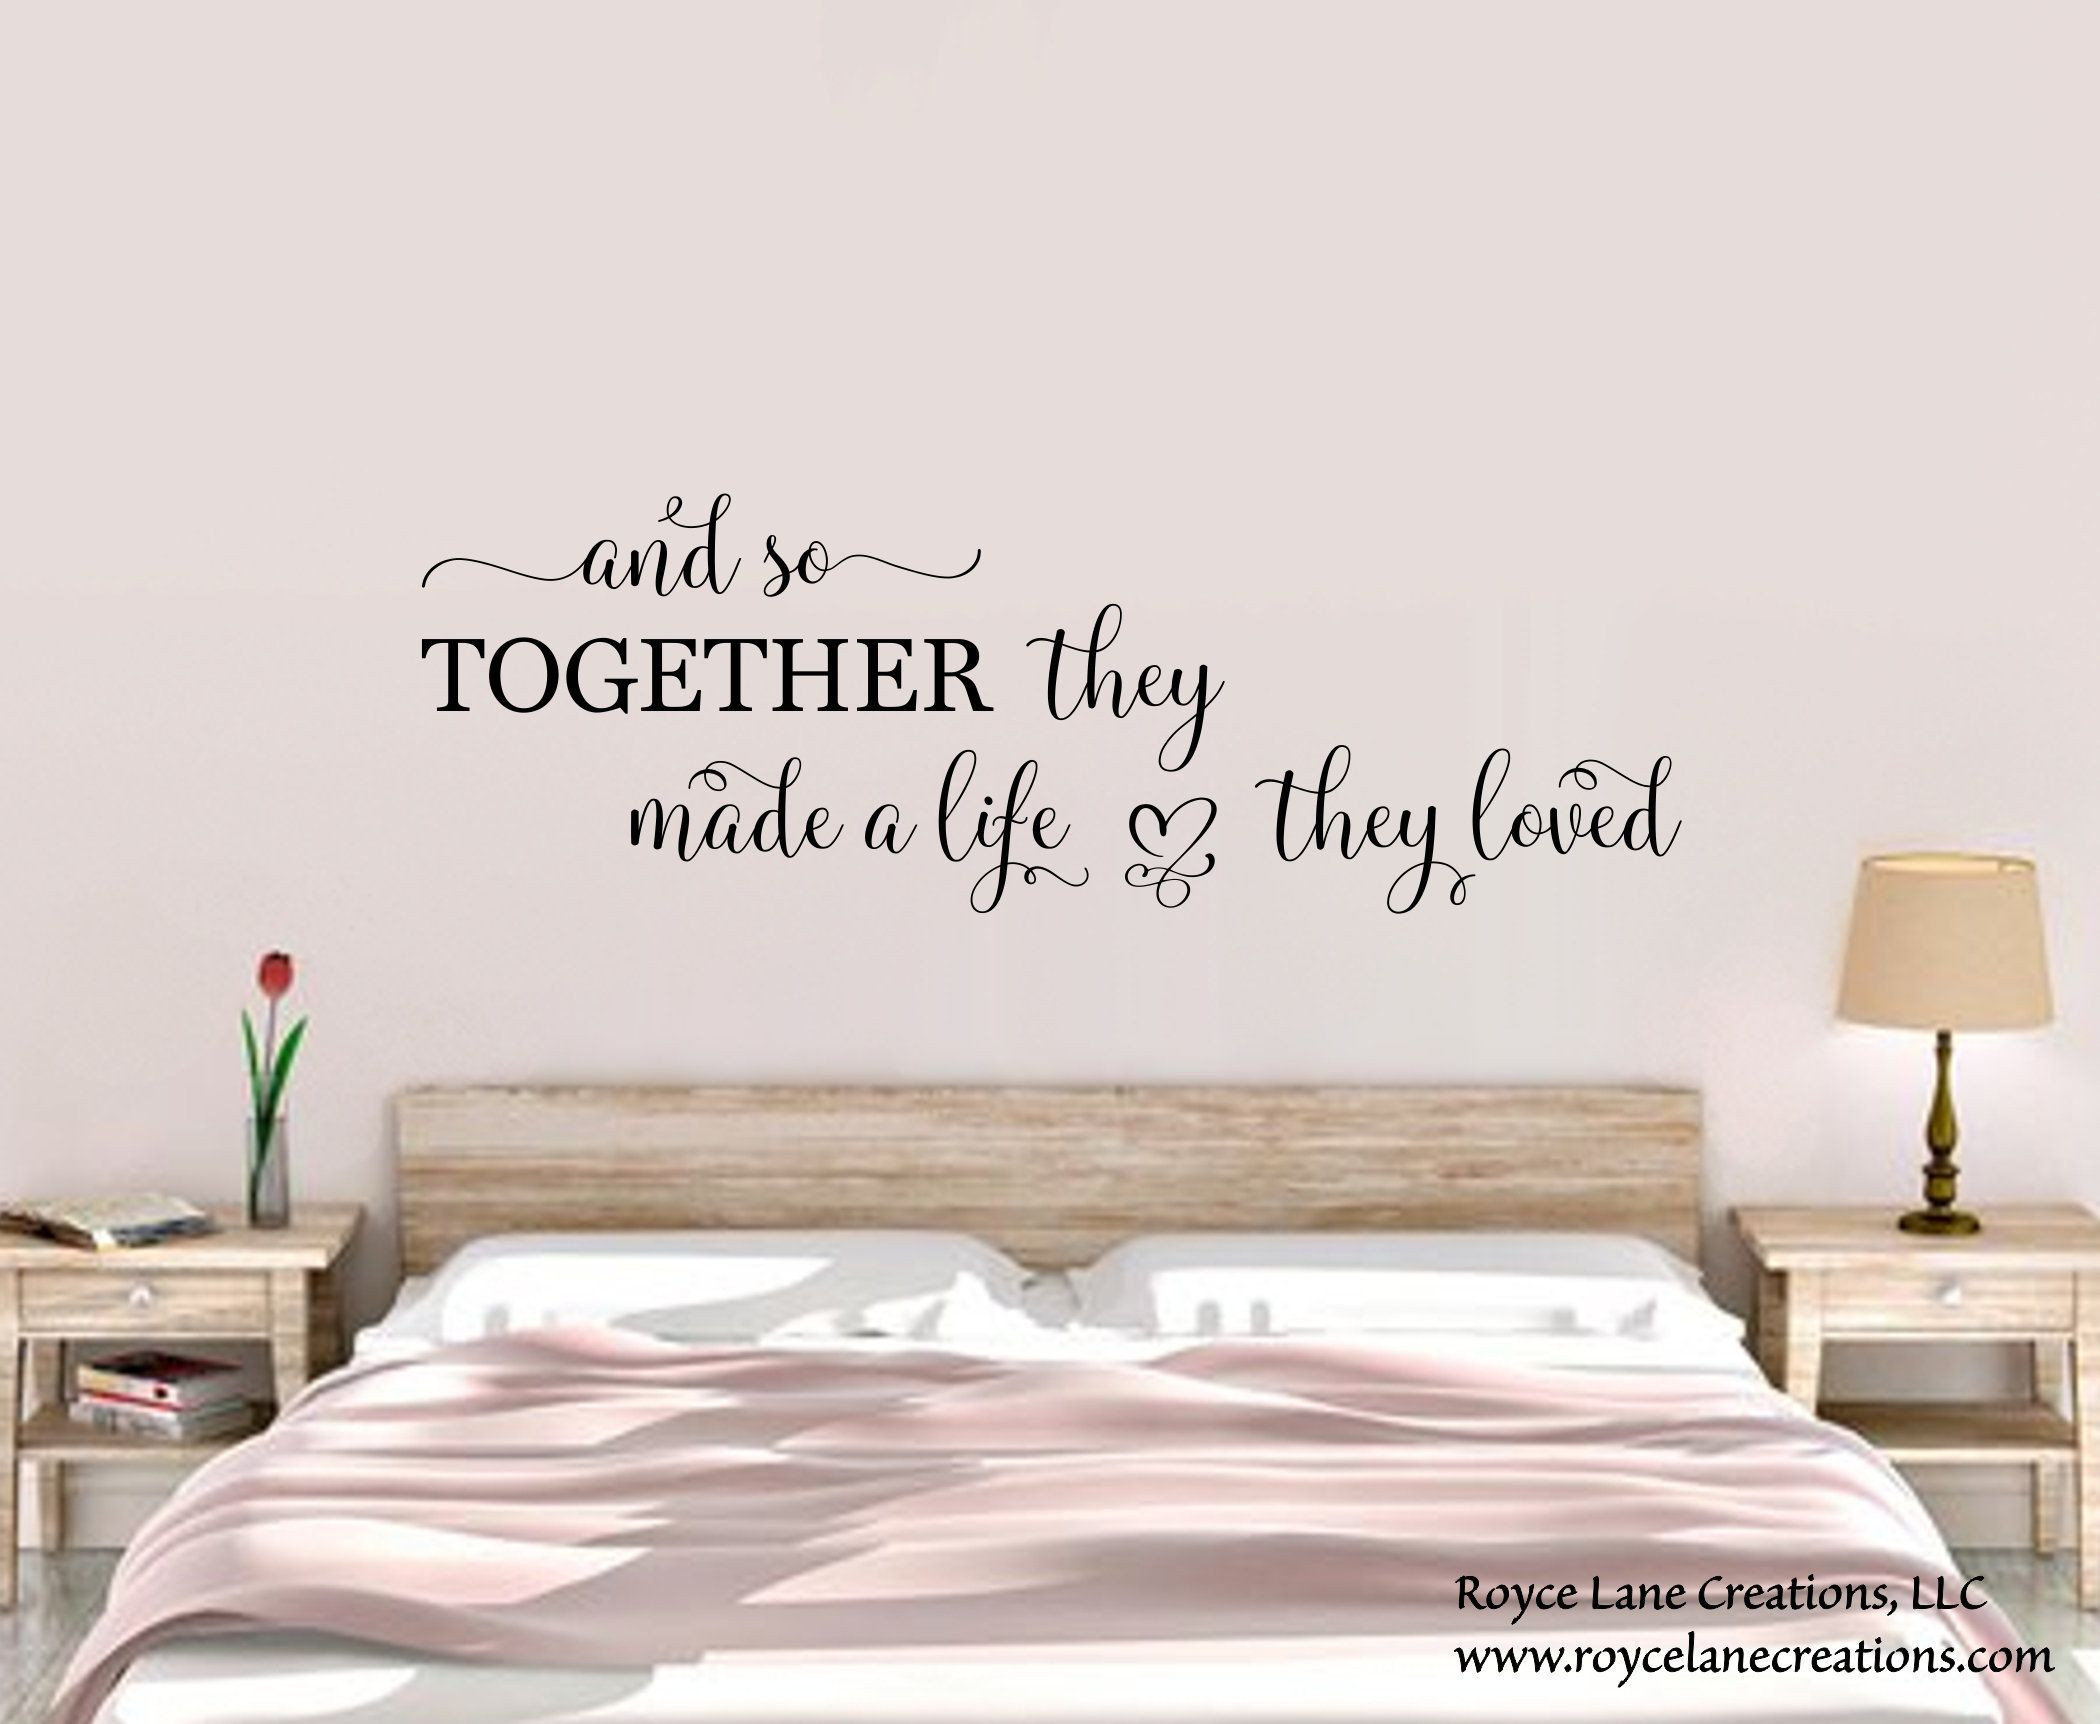 Wall Decal Quotes For Bedroom
 Bedroom Wall Decal And So To her They Built A Life They